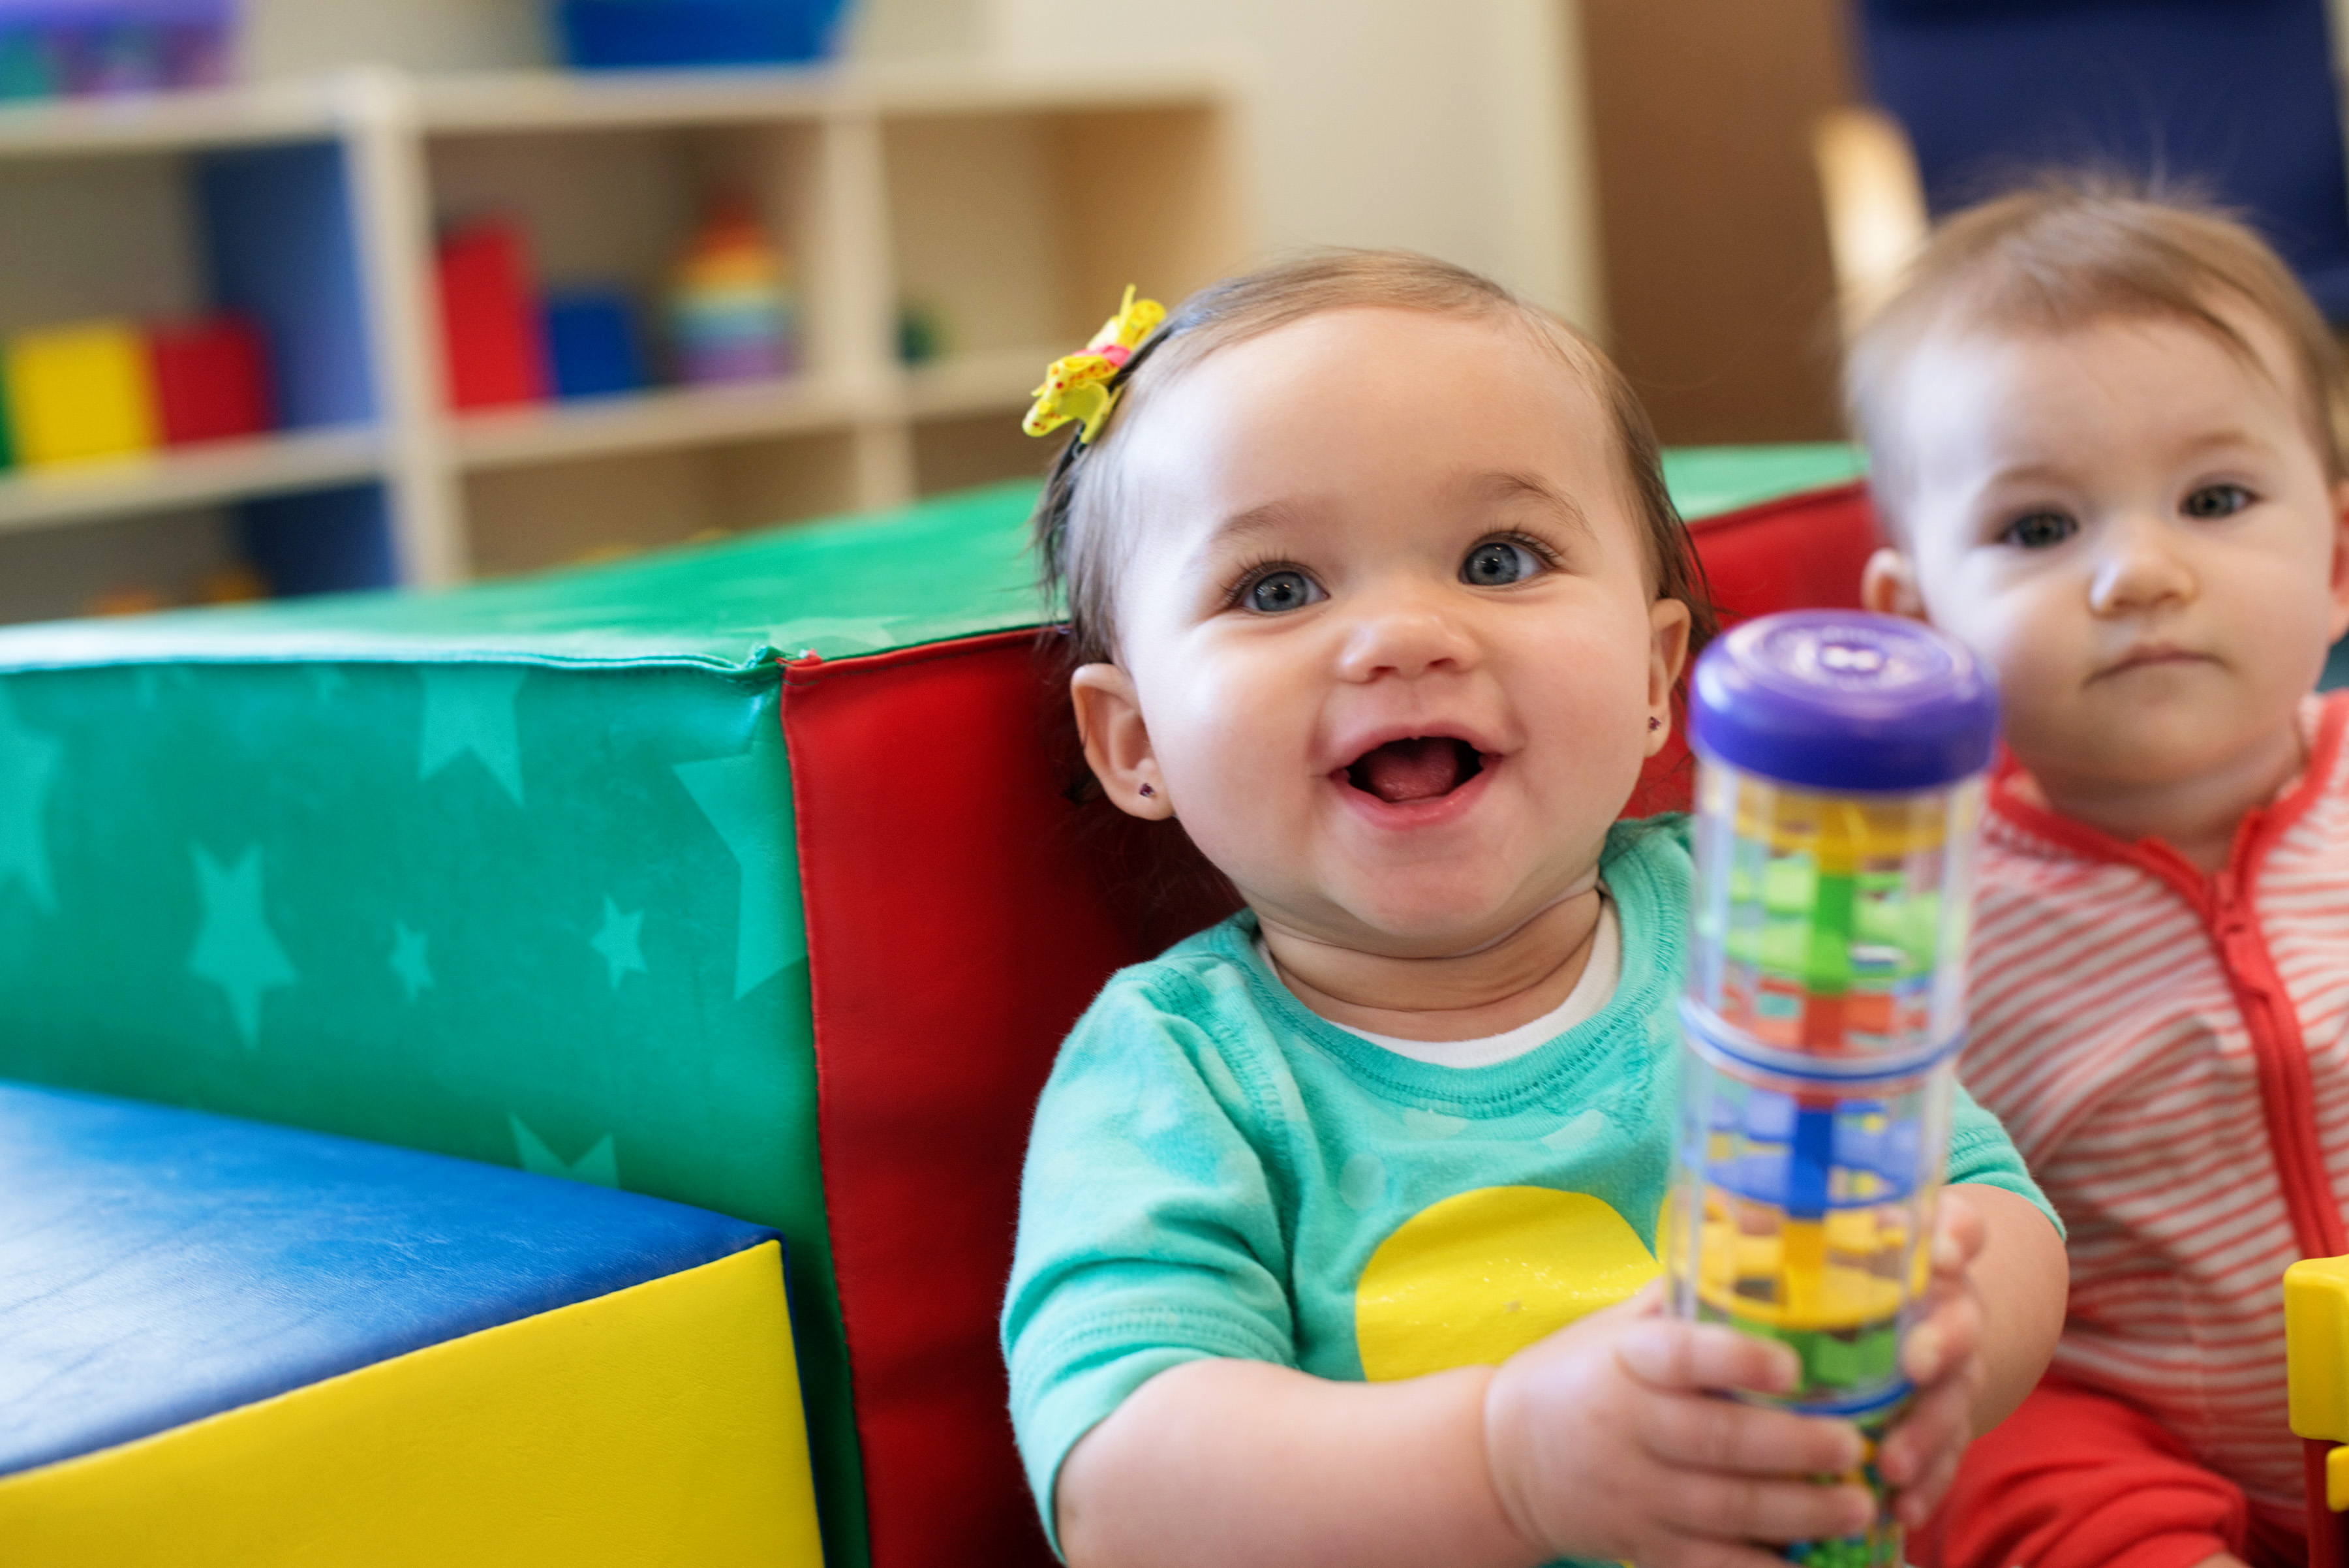 6 Engaging Musical Activities for Infants through Pre-K